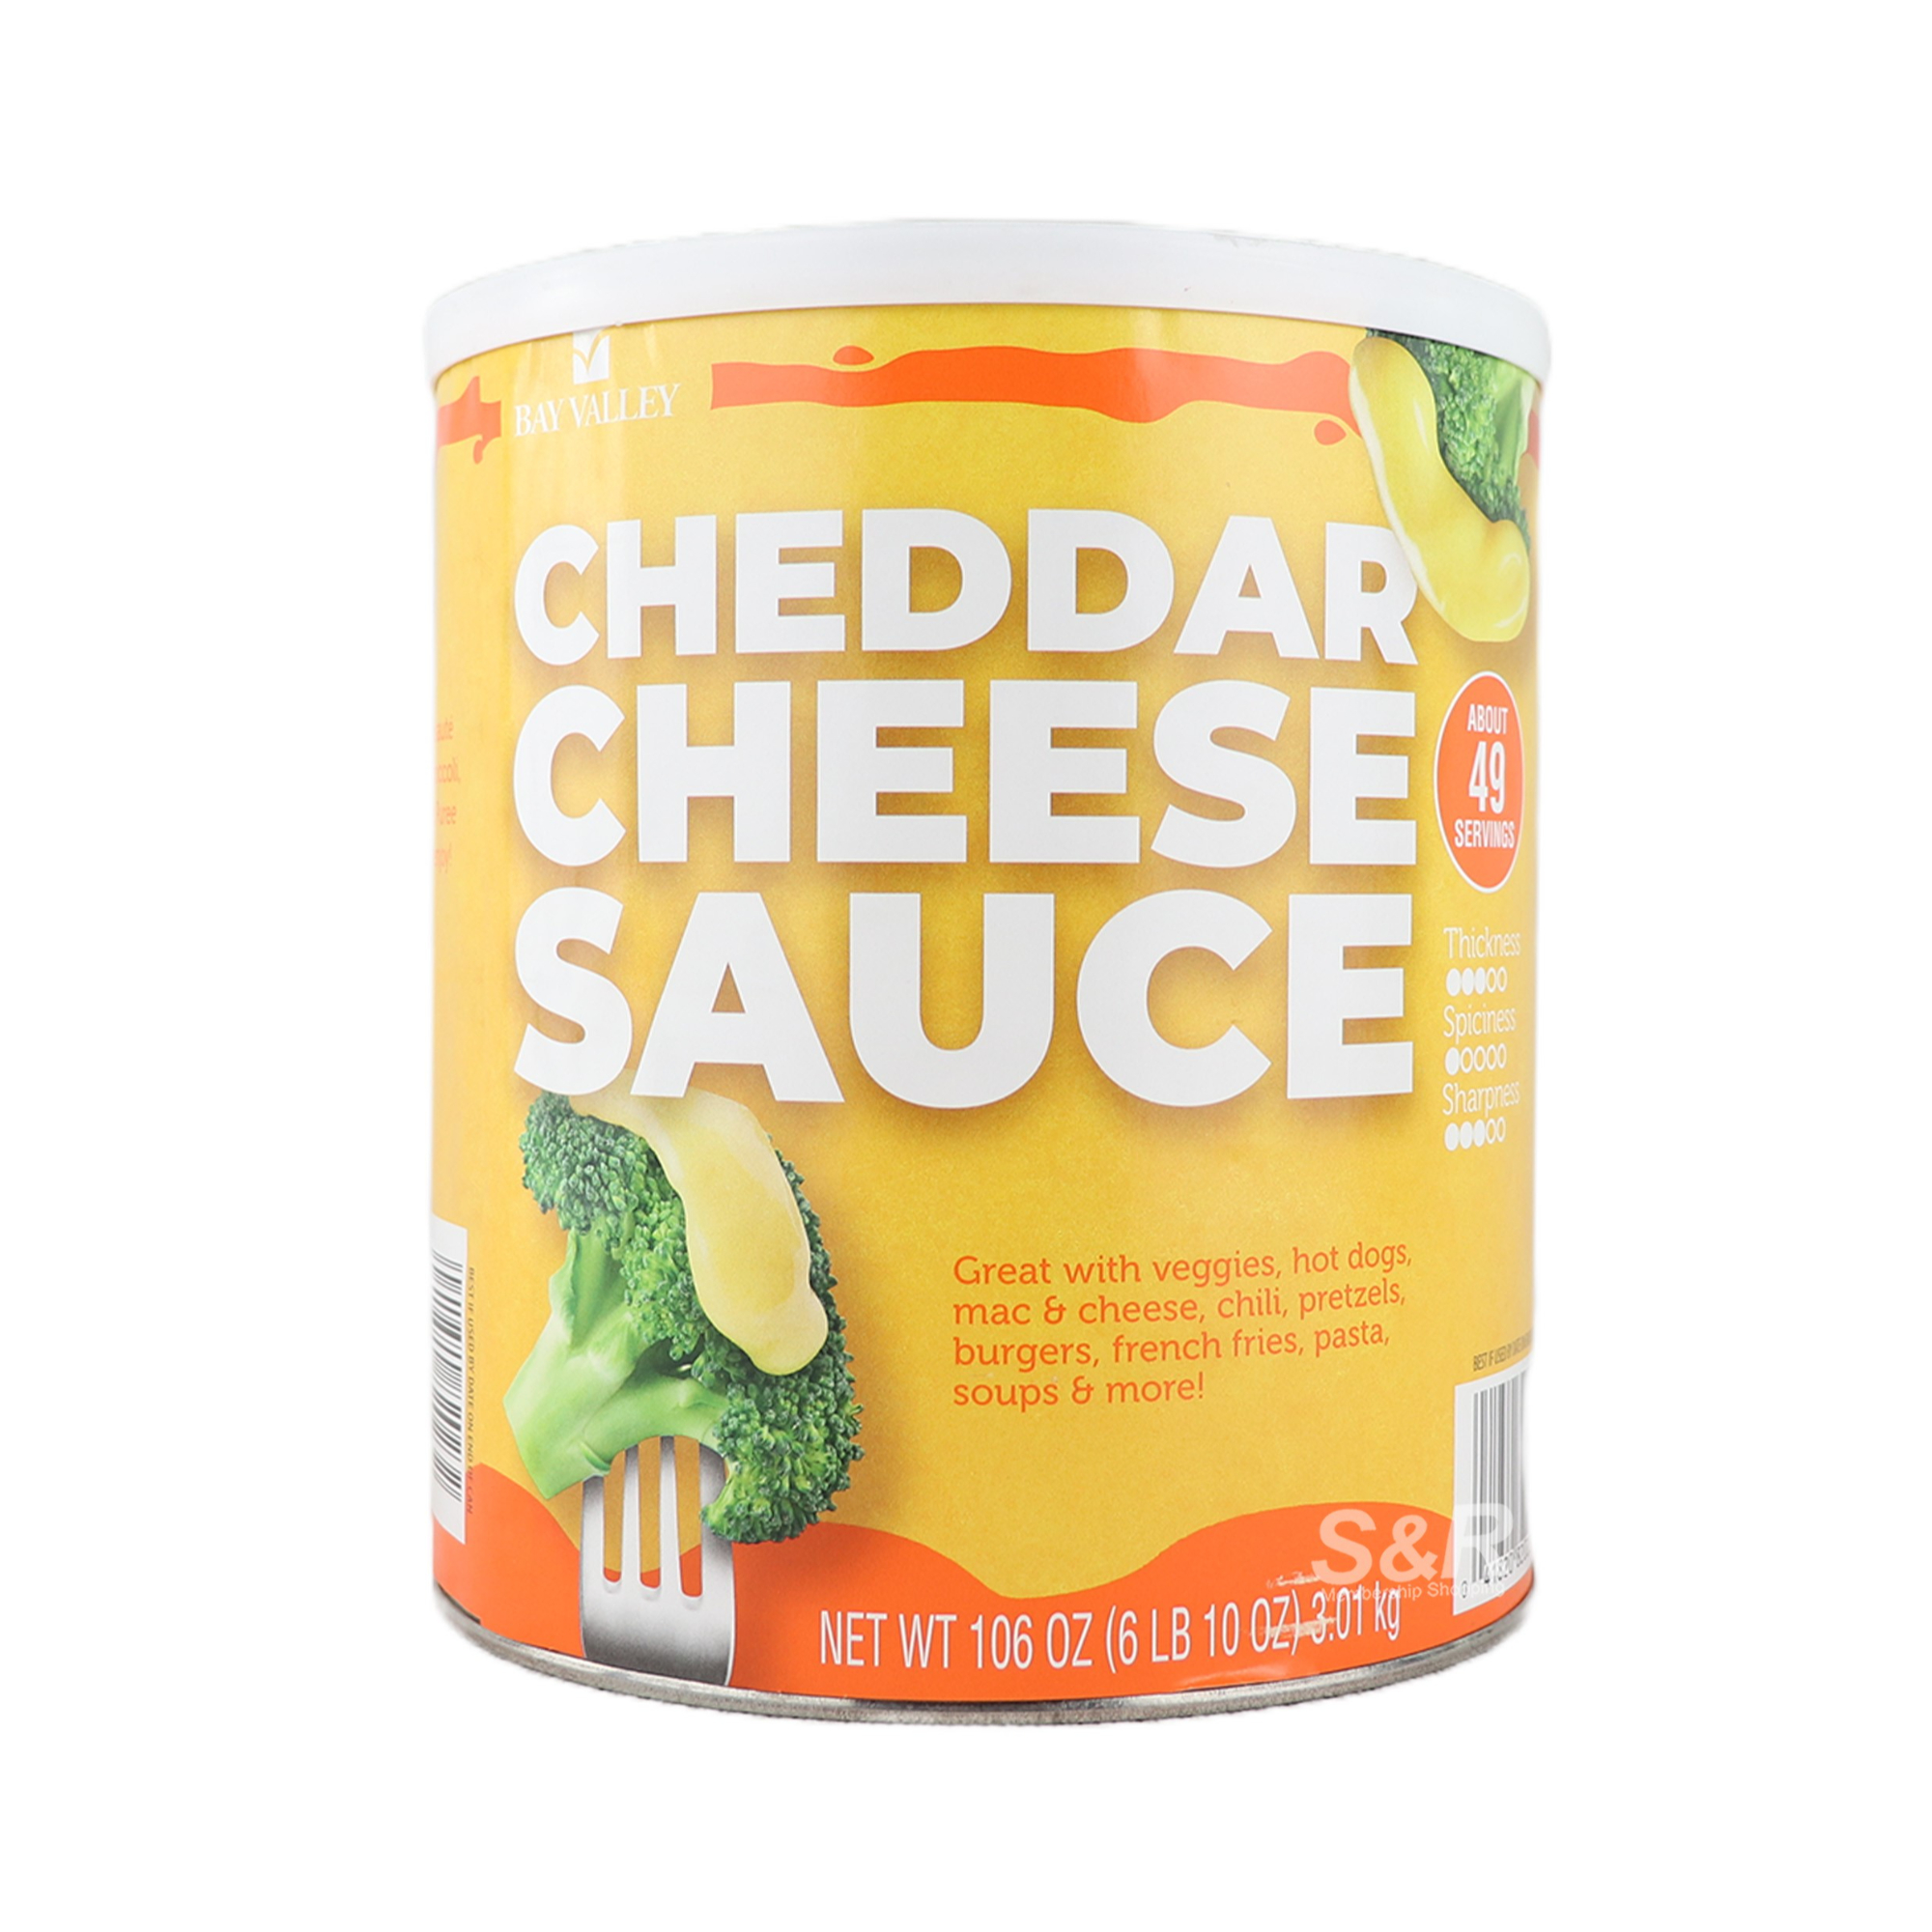 Bay Valley Cheddar Cheese Sauce 3.01kg